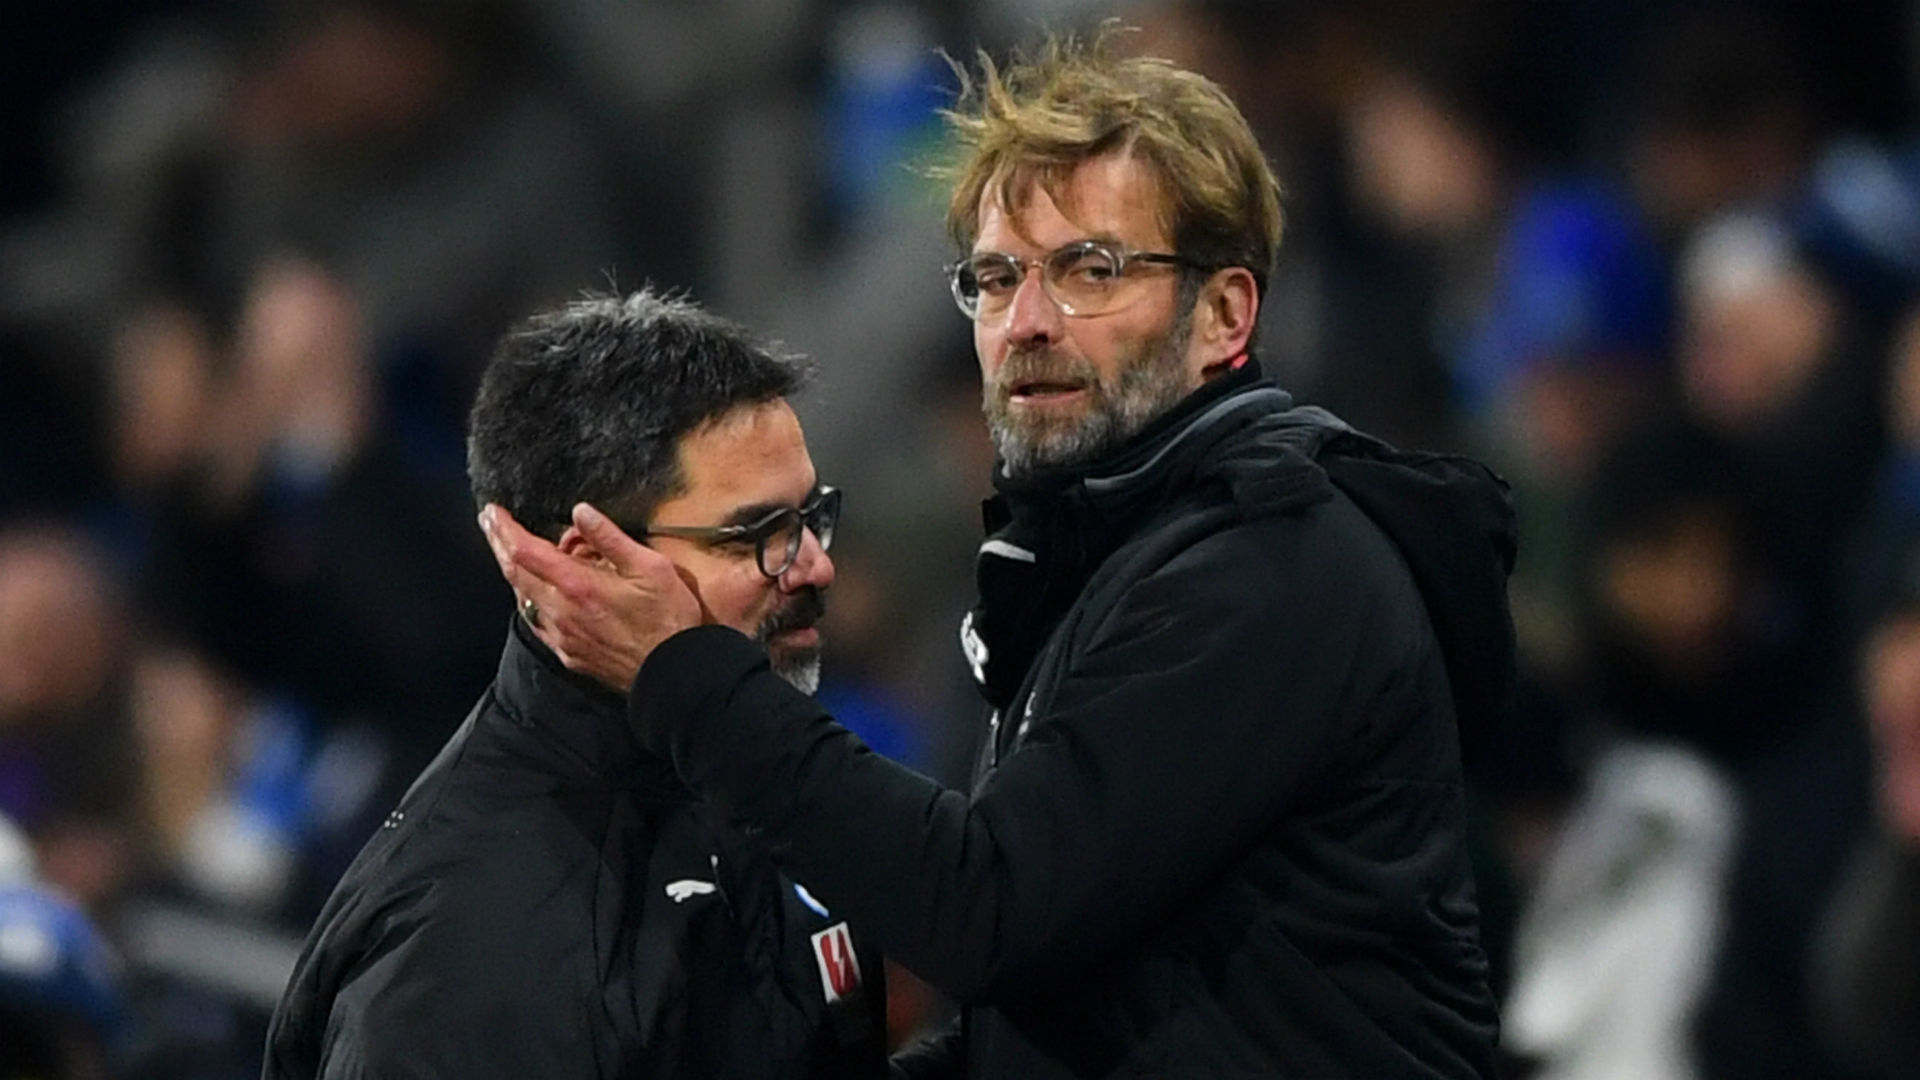 Jurgen Klopp has the support of friend and former colleague David Wagner as he bids to win the Premier League with Liverpool.